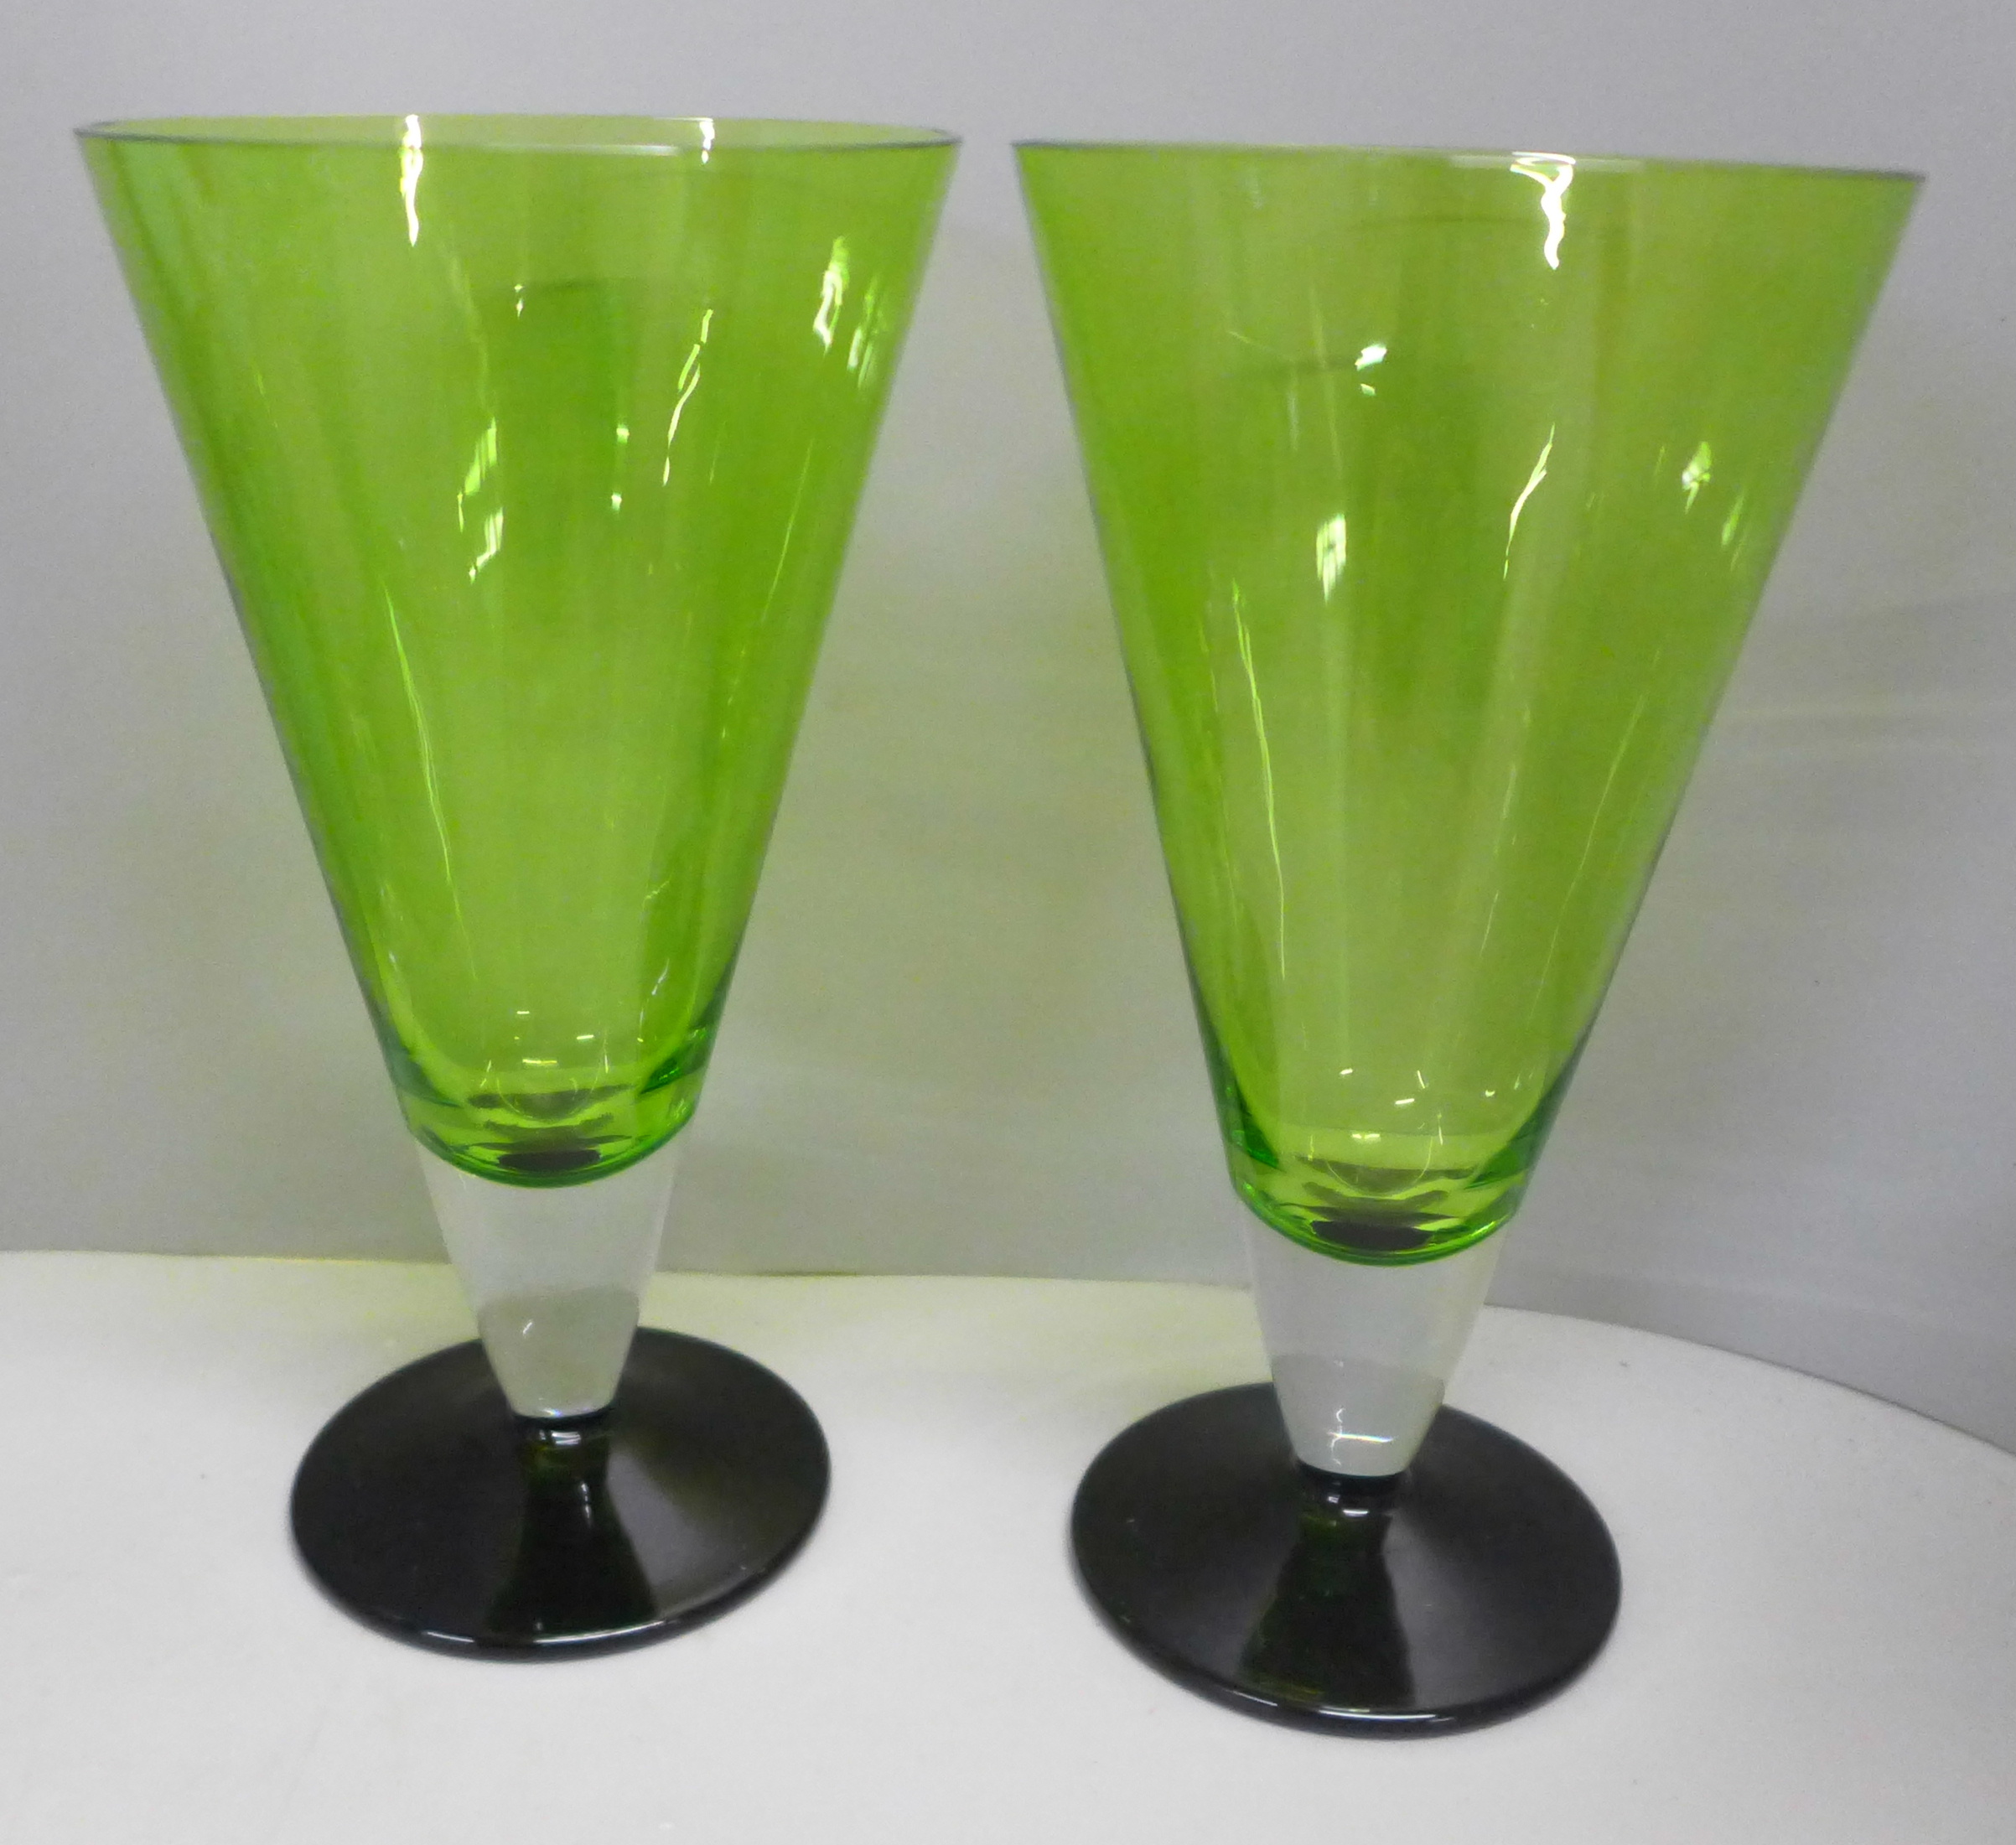 A box of mixed Studio glass, Art Deco style green and black glass cocktail glasses, vases, etc. (15) - Image 2 of 9